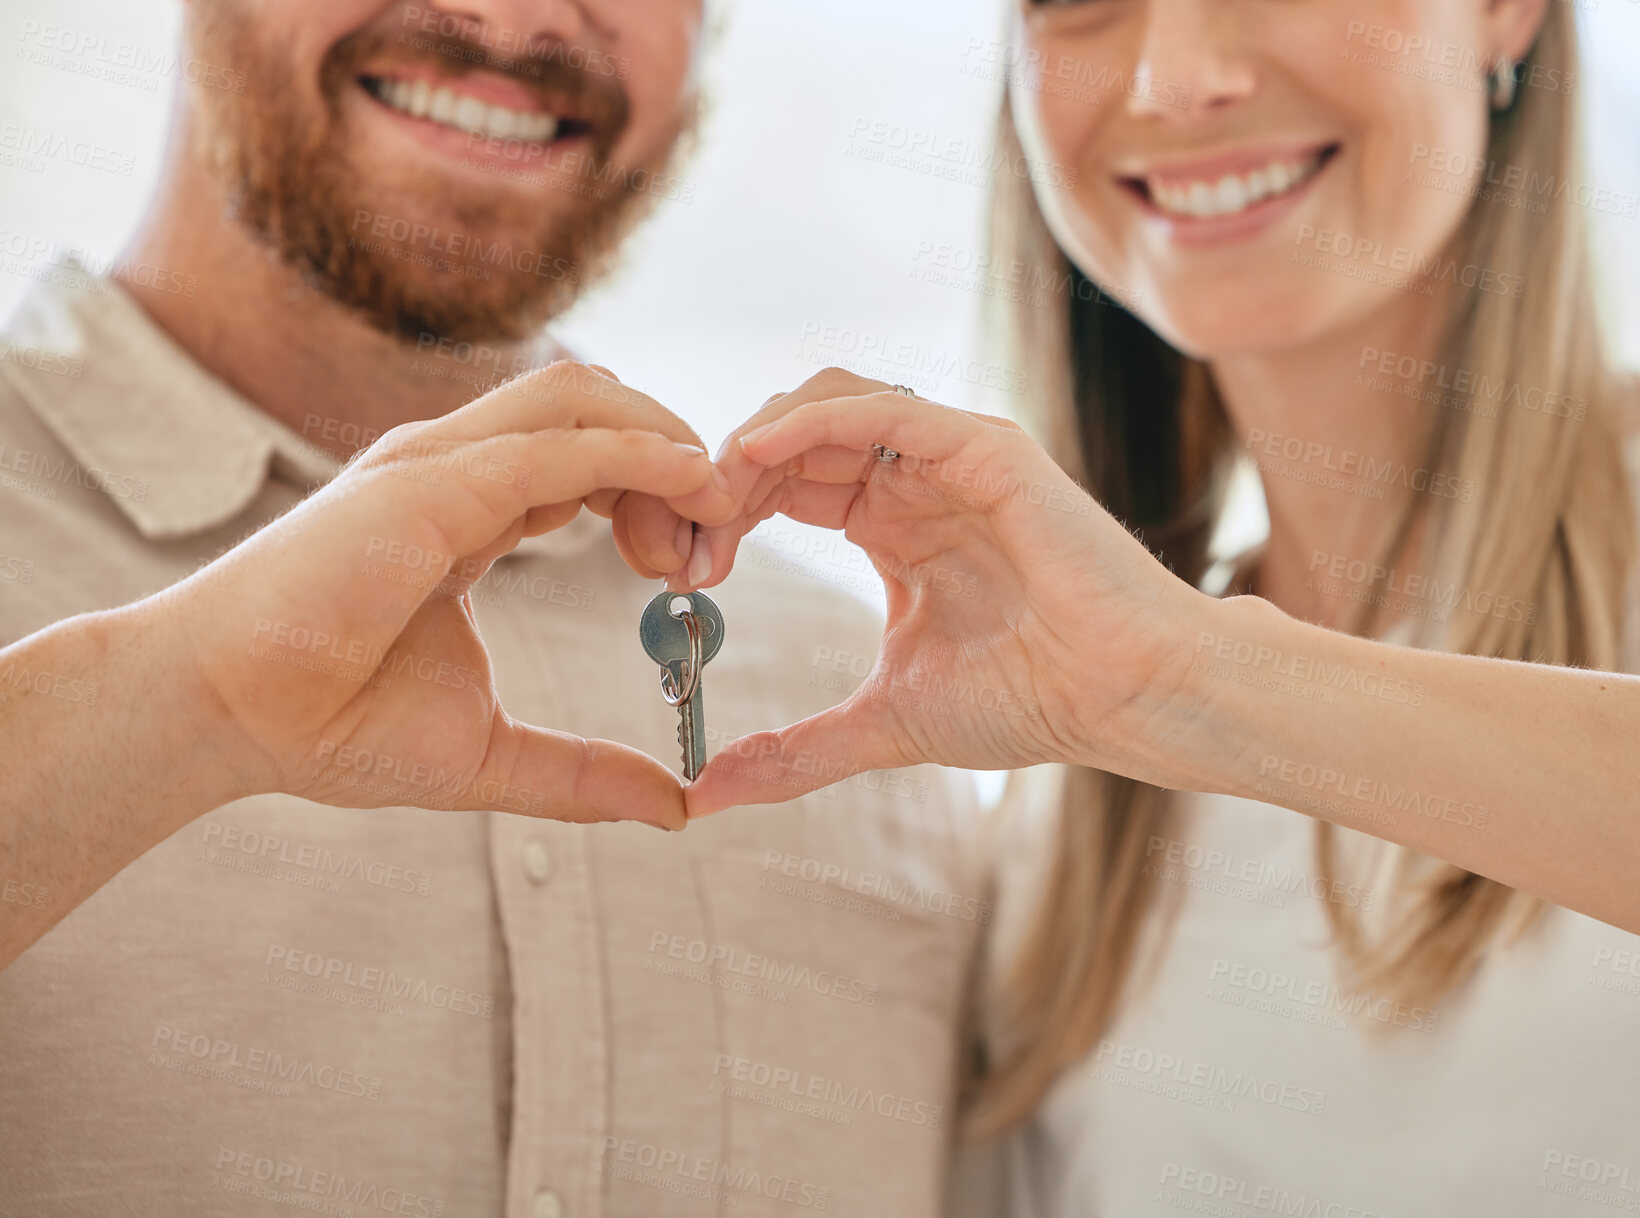 Buy stock photo Shot of an unrecognizable couple making a heart gesture with their hands while holding the keys to their new house